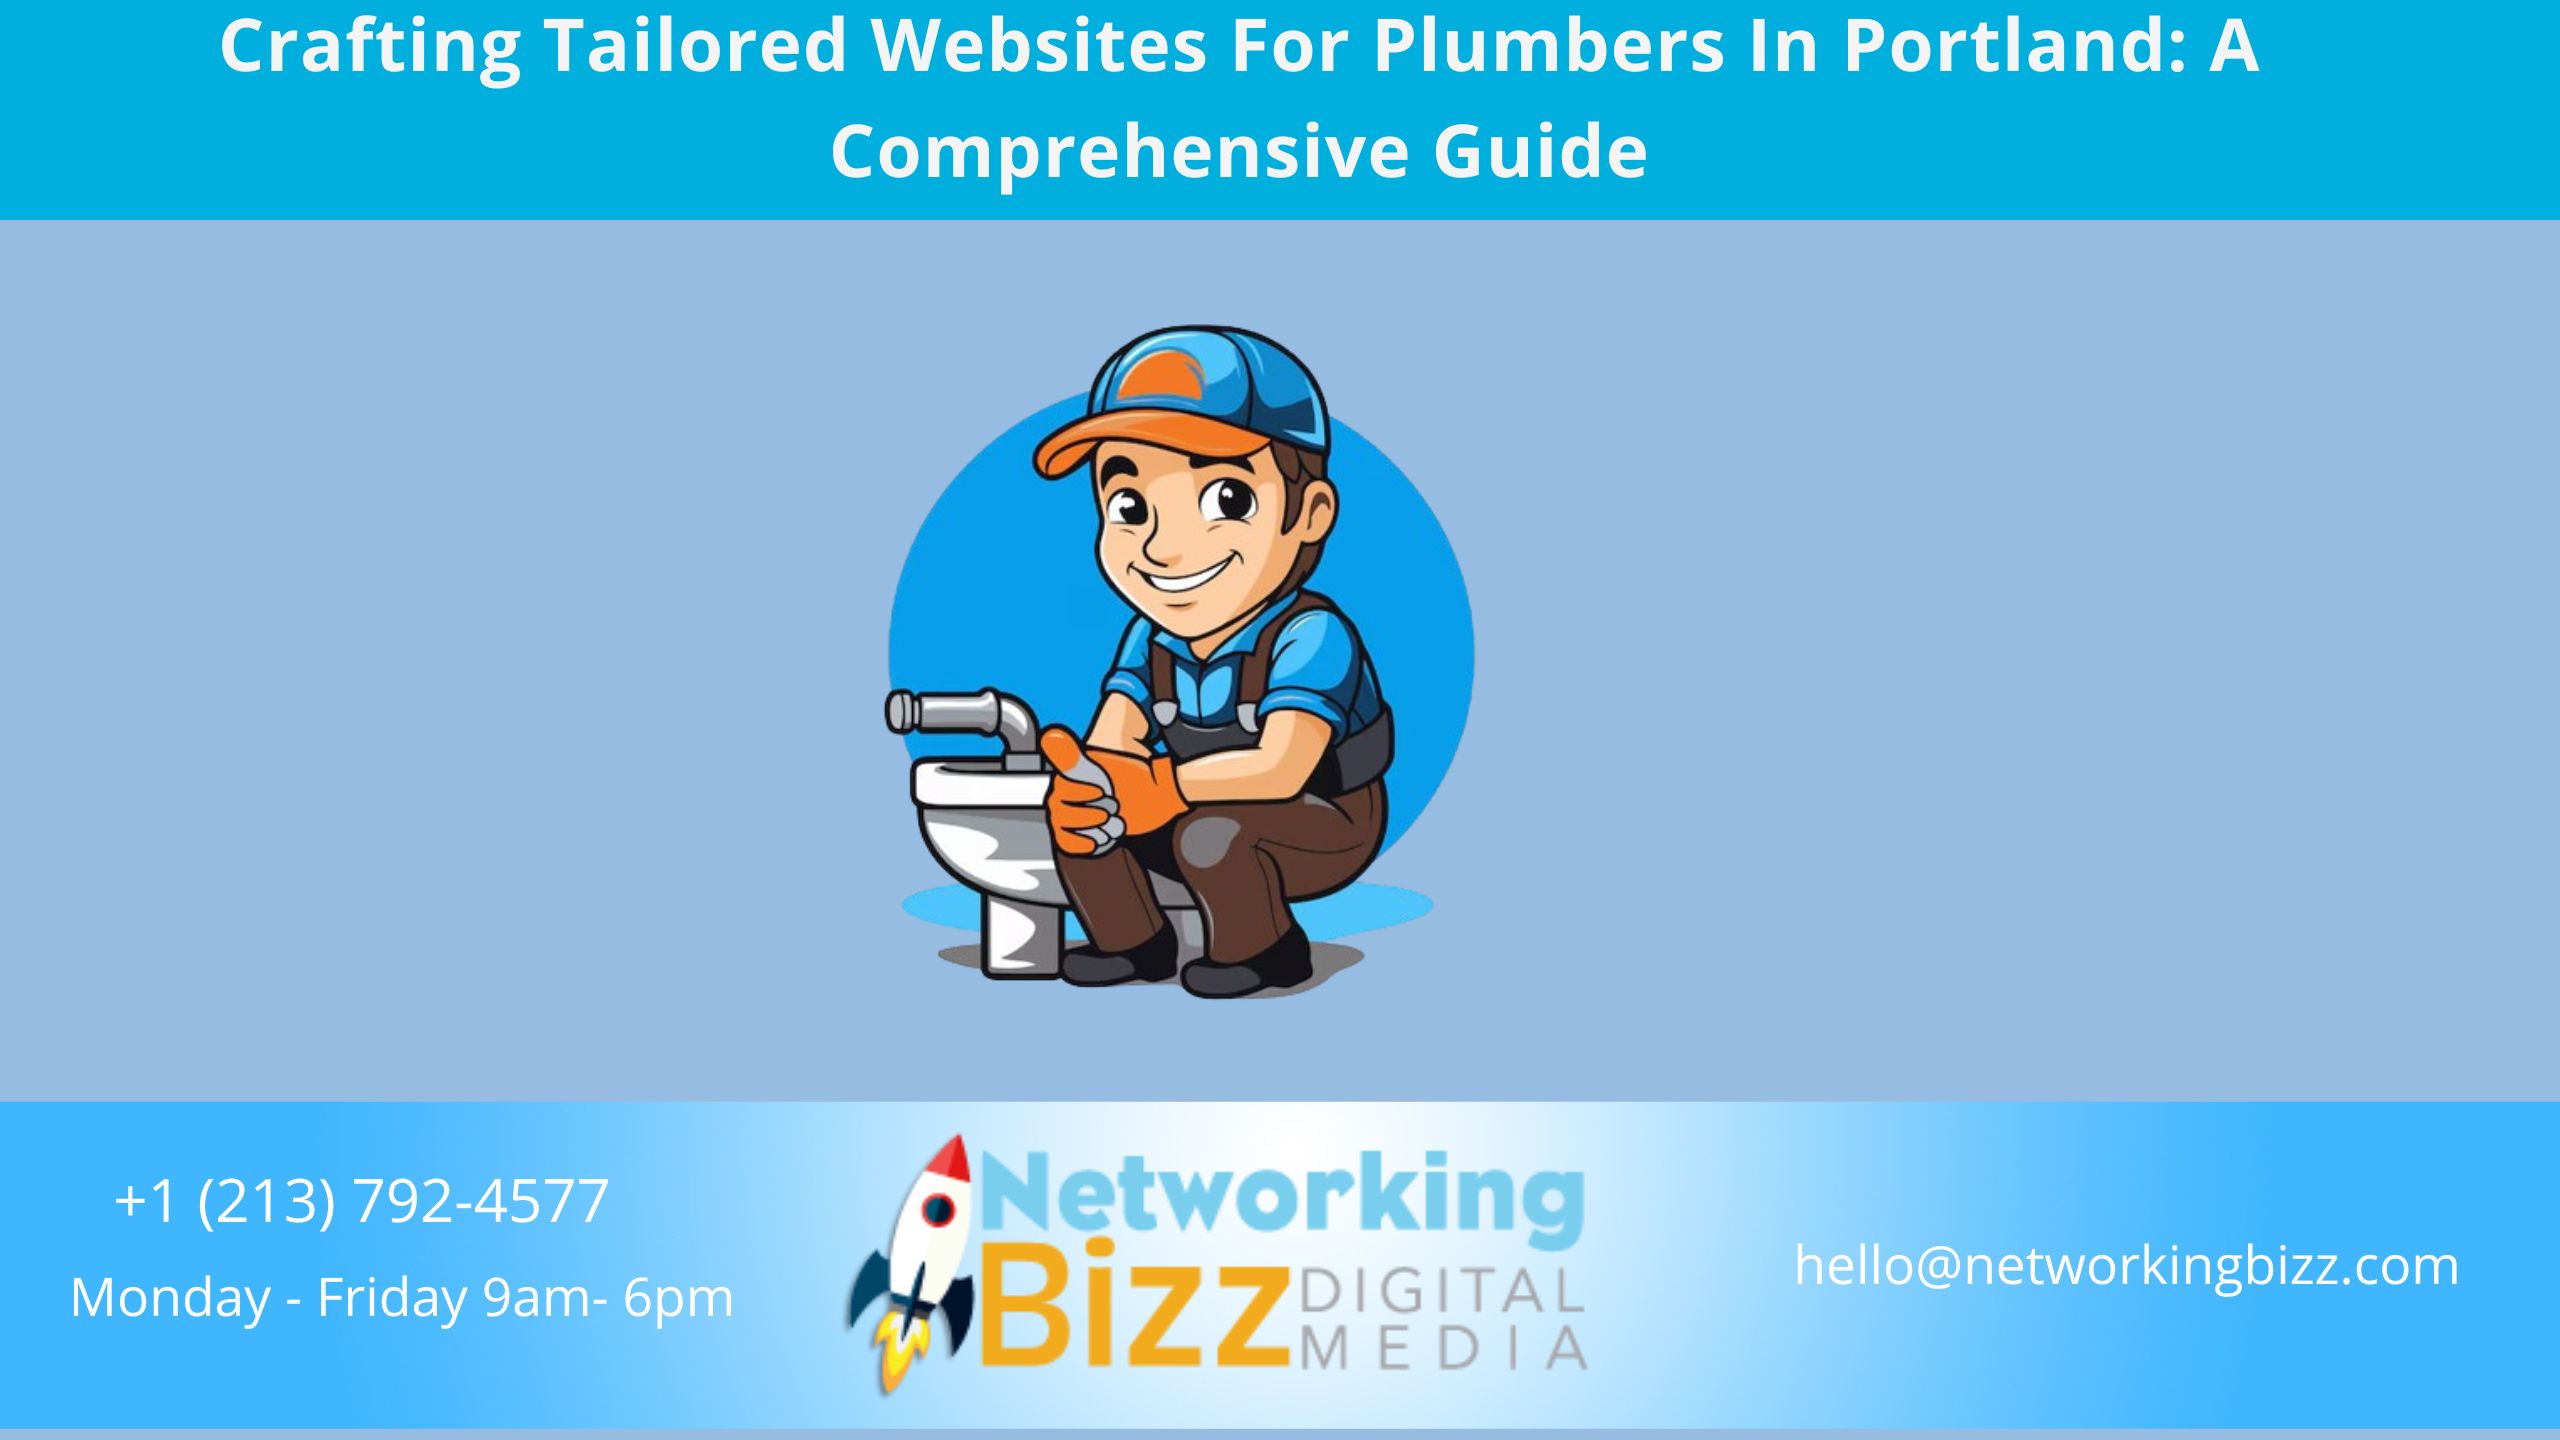 Crafting Tailored Websites For Plumbers In Portland: A Comprehensive Guide